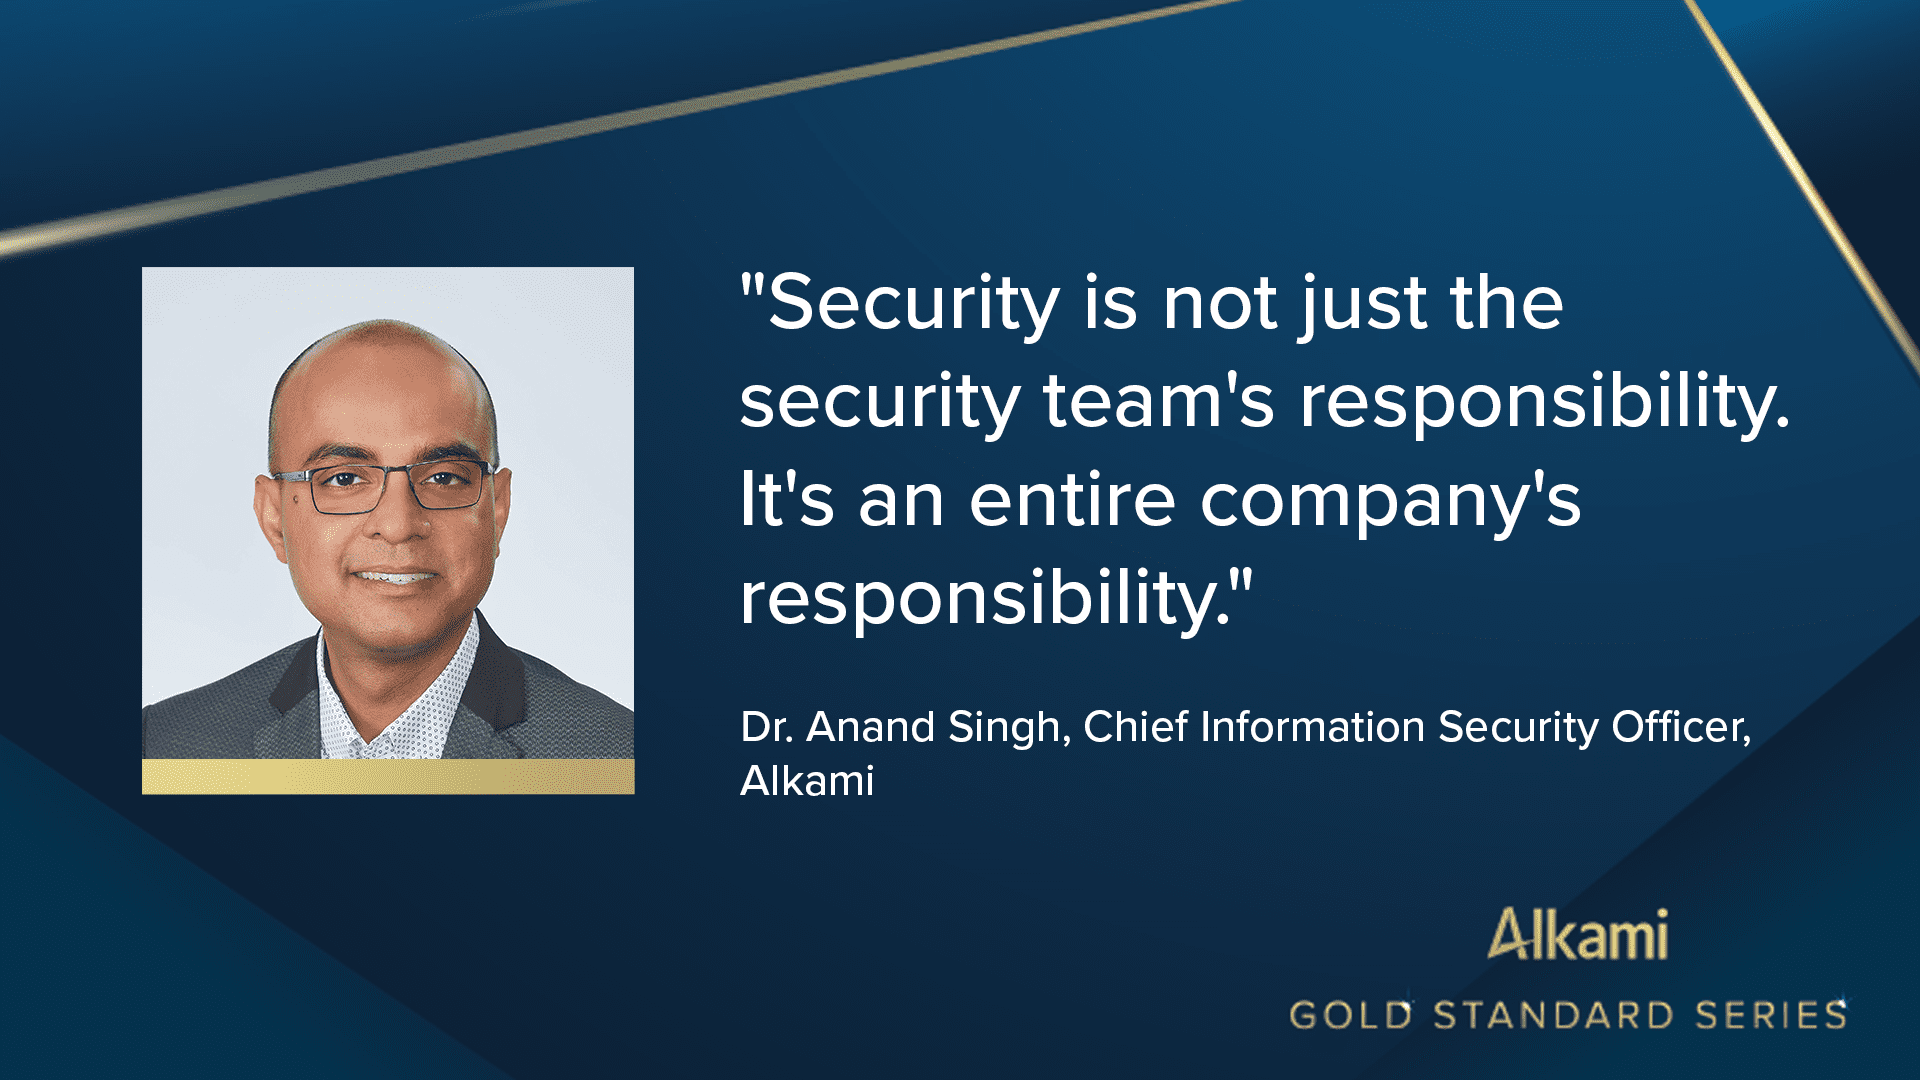 Dr. Anand Singh, Chief Information Security Officer at Alkami